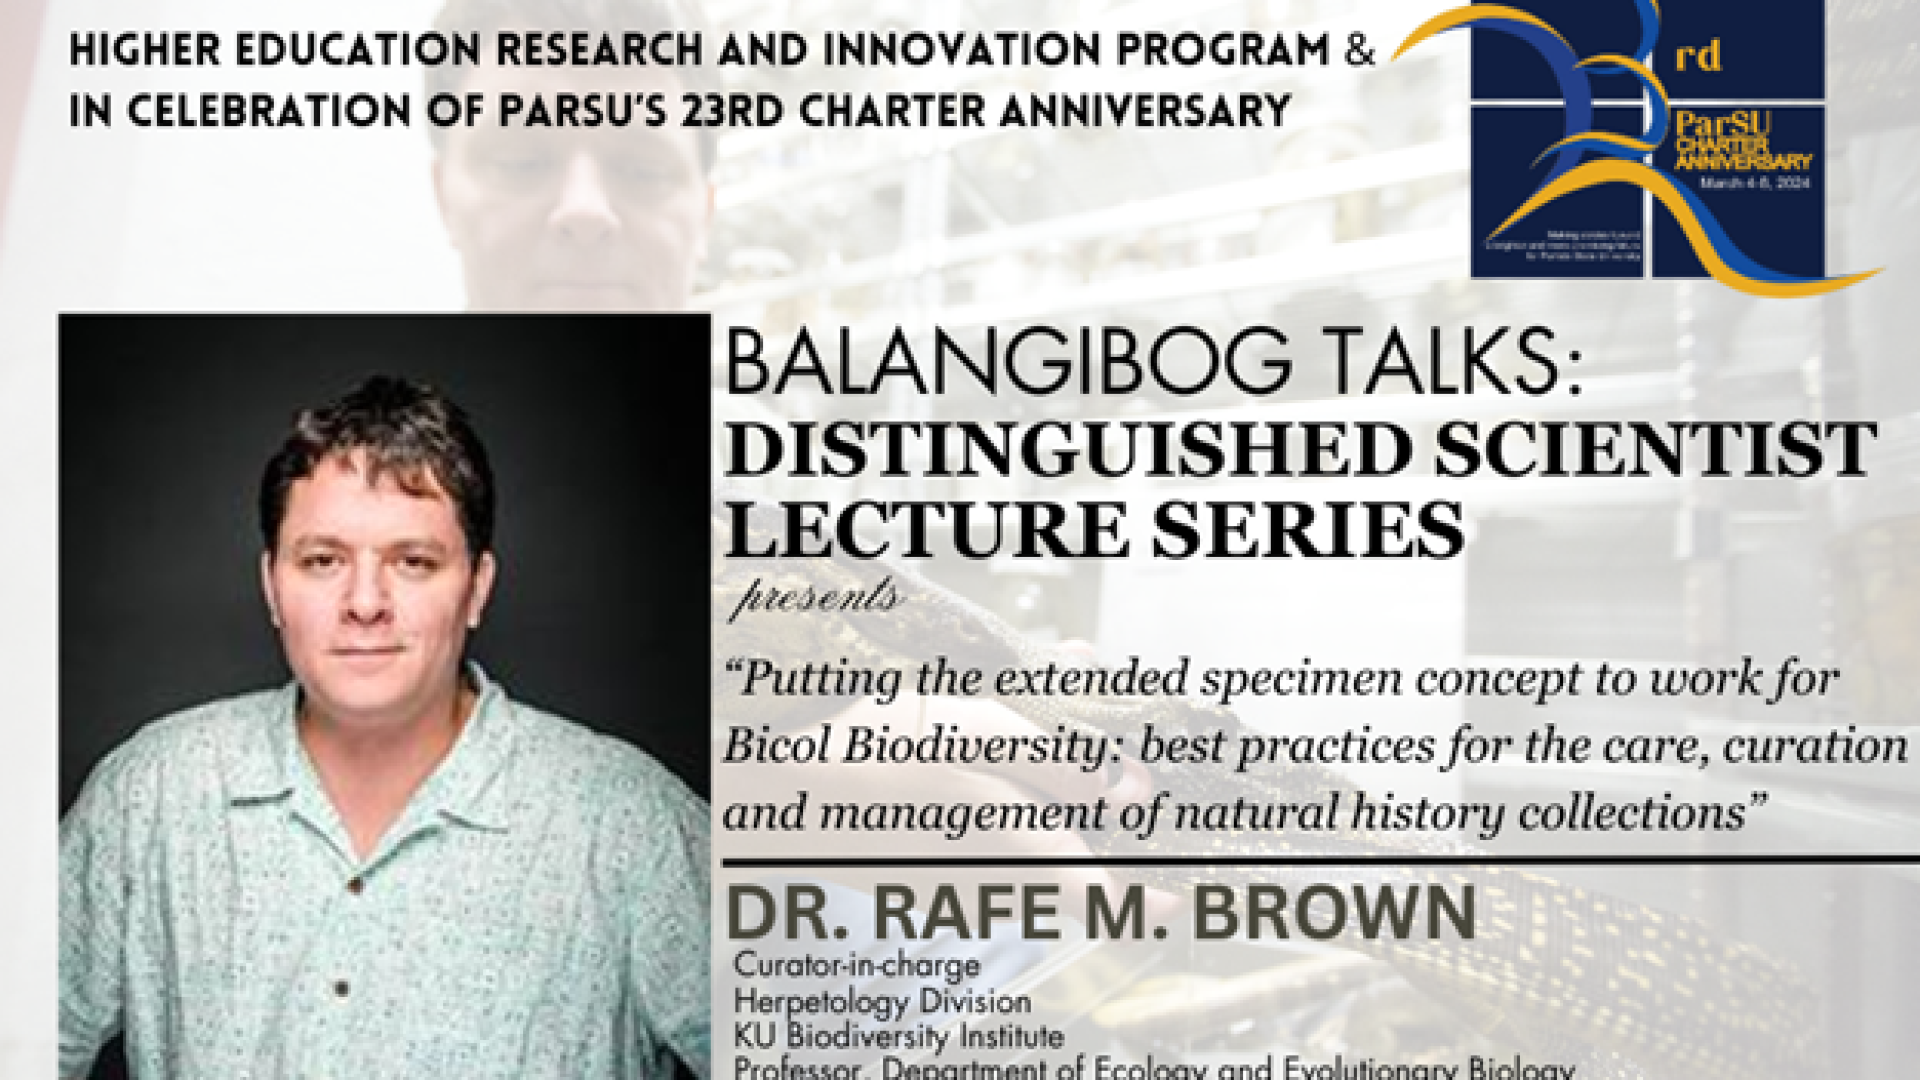 Inaugural Distinguished Scientist Lecture by Dr. Rafe M. Brown of Kansas University